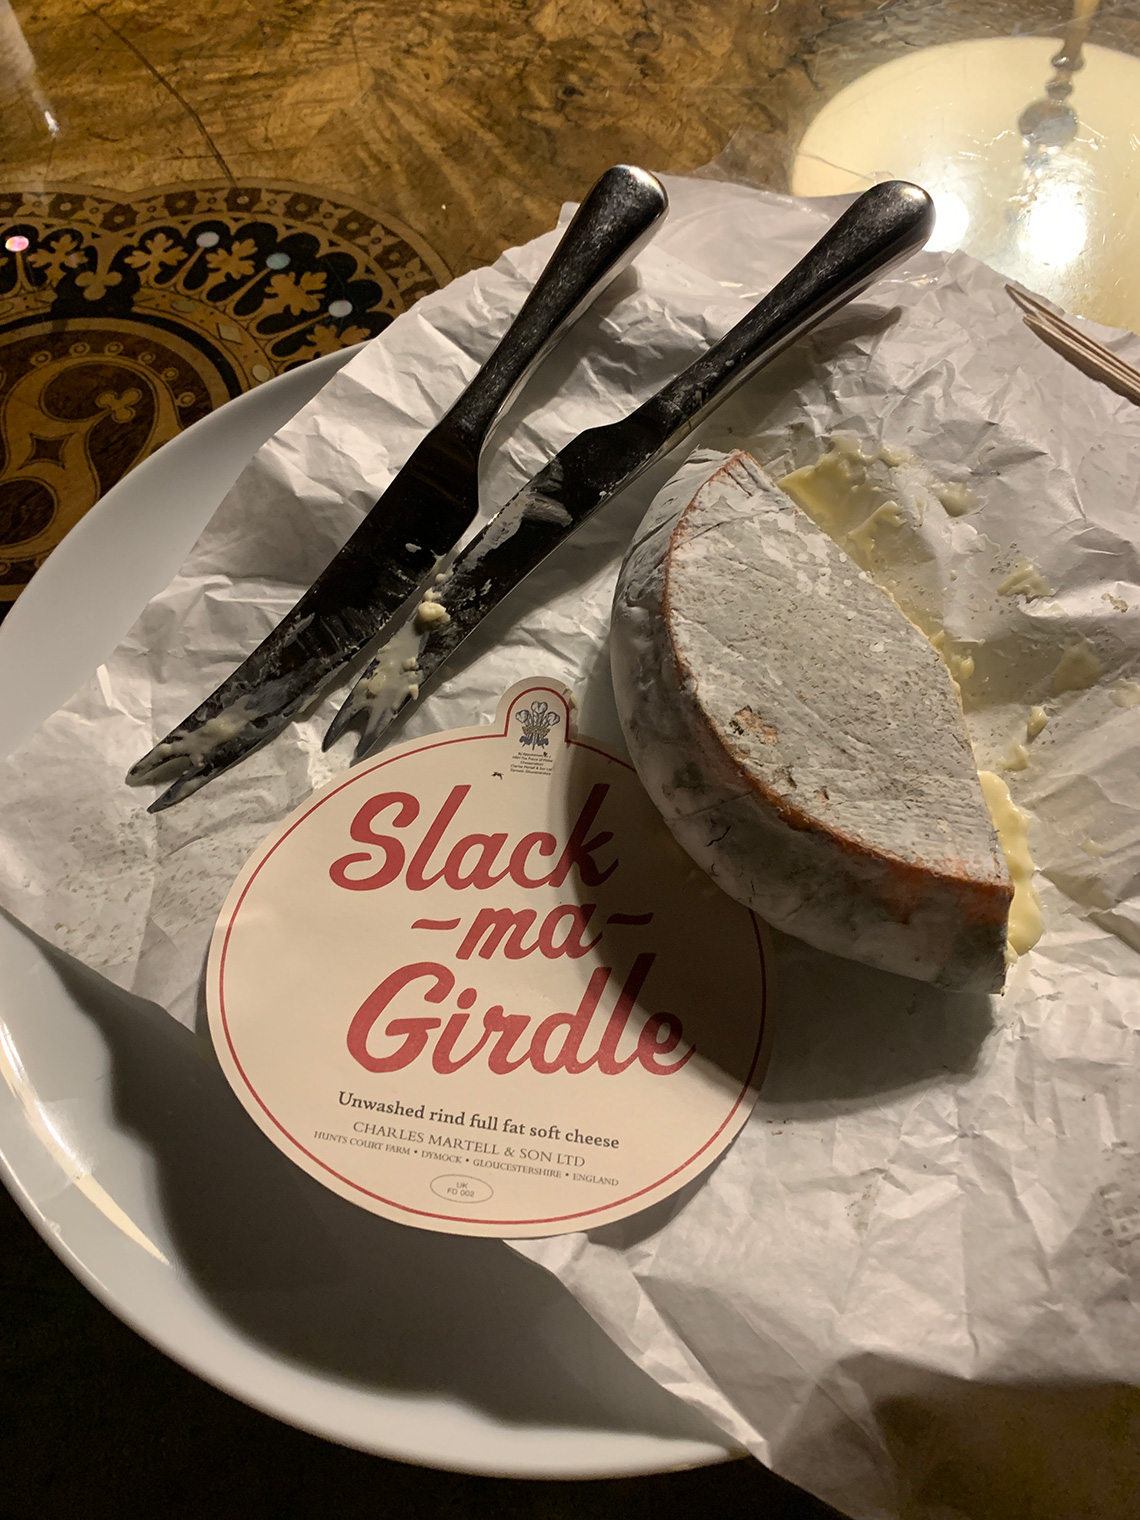 Charles Martell & Son's artisan cheese